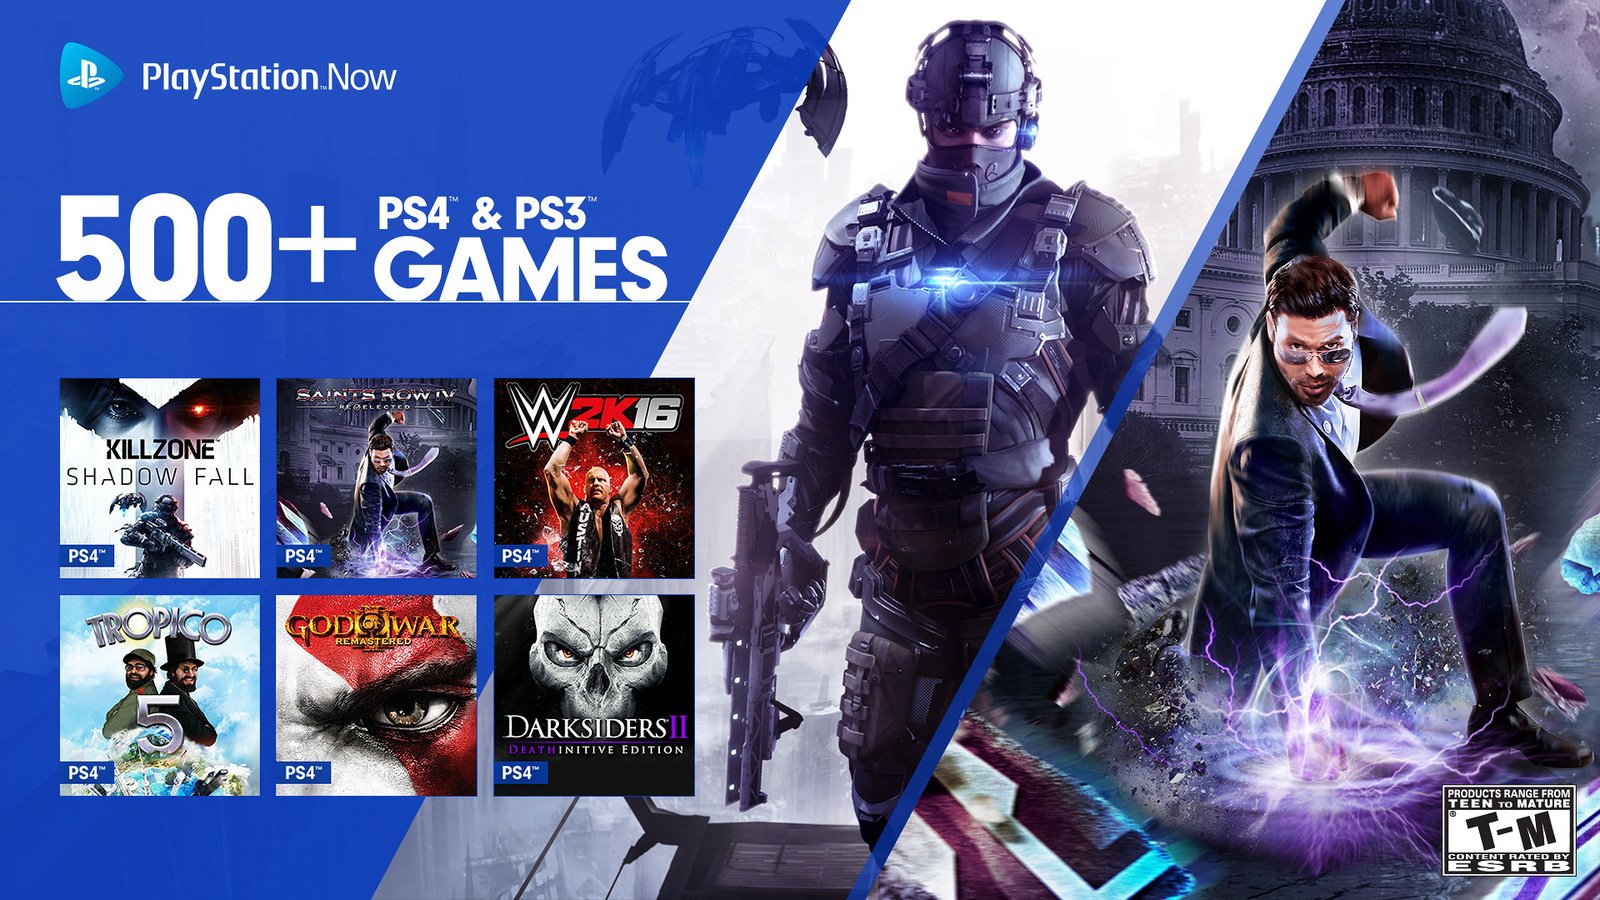 Reusachtig Vaderlijk in het midden van niets PlayStation on Twitter: "PS4 games join the PlayStation Now lineup starting  today! https://t.co/MBtopoW7eX Stream over 500 PS3 &amp; PS4 games to your  PS4 or PC 🎮 https://t.co/VYo7AnXZvL" / Twitter